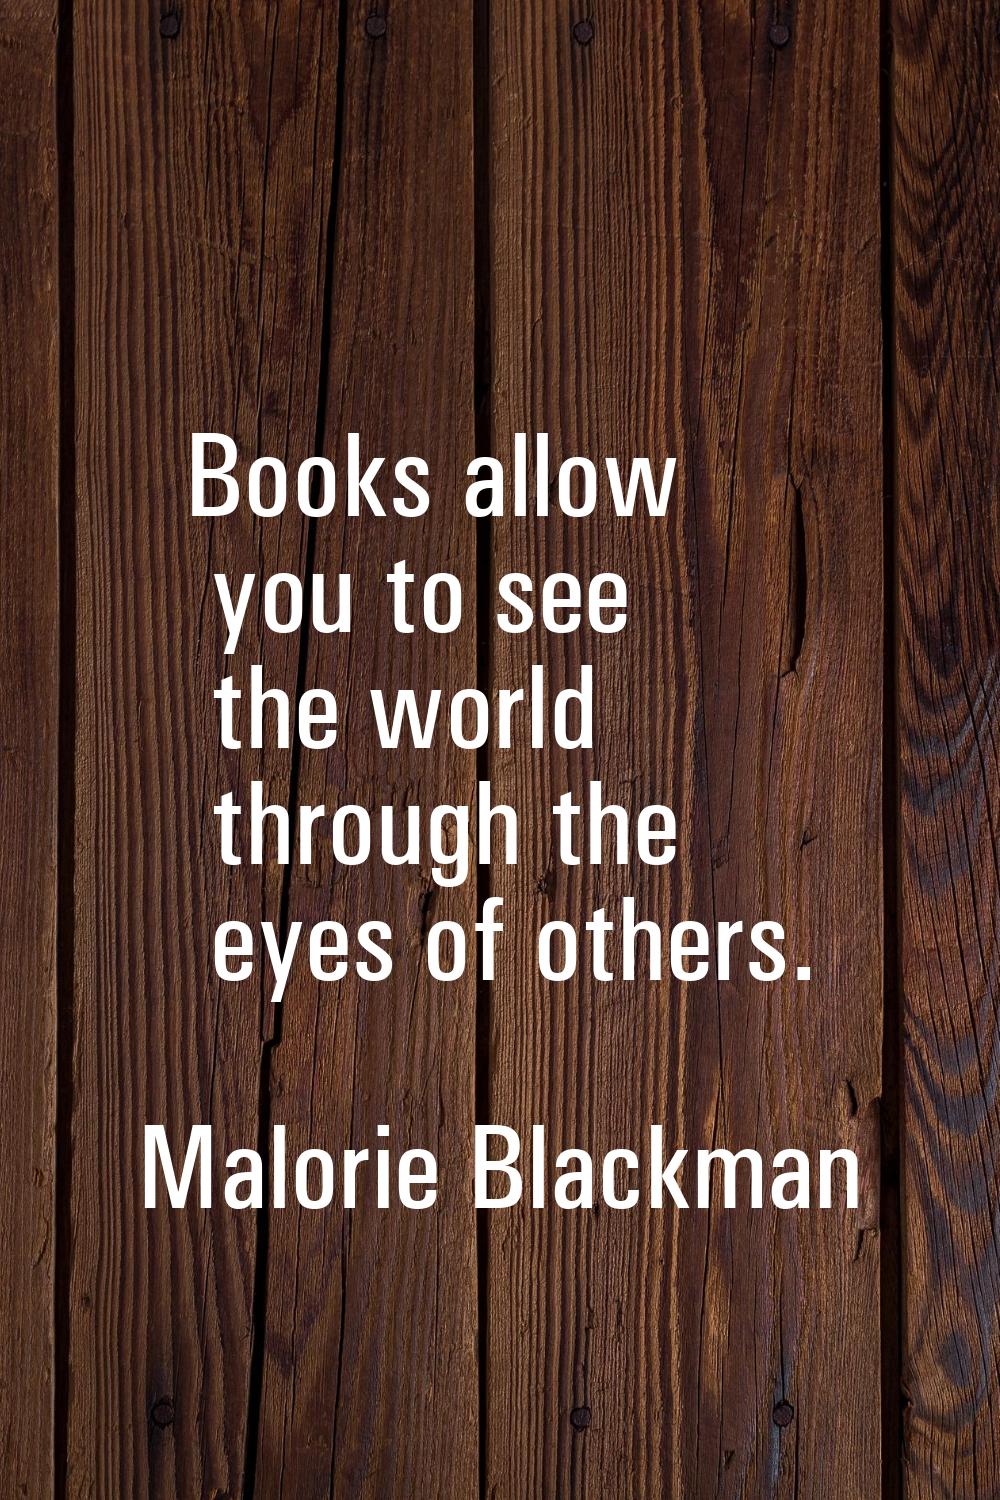 Books allow you to see the world through the eyes of others.